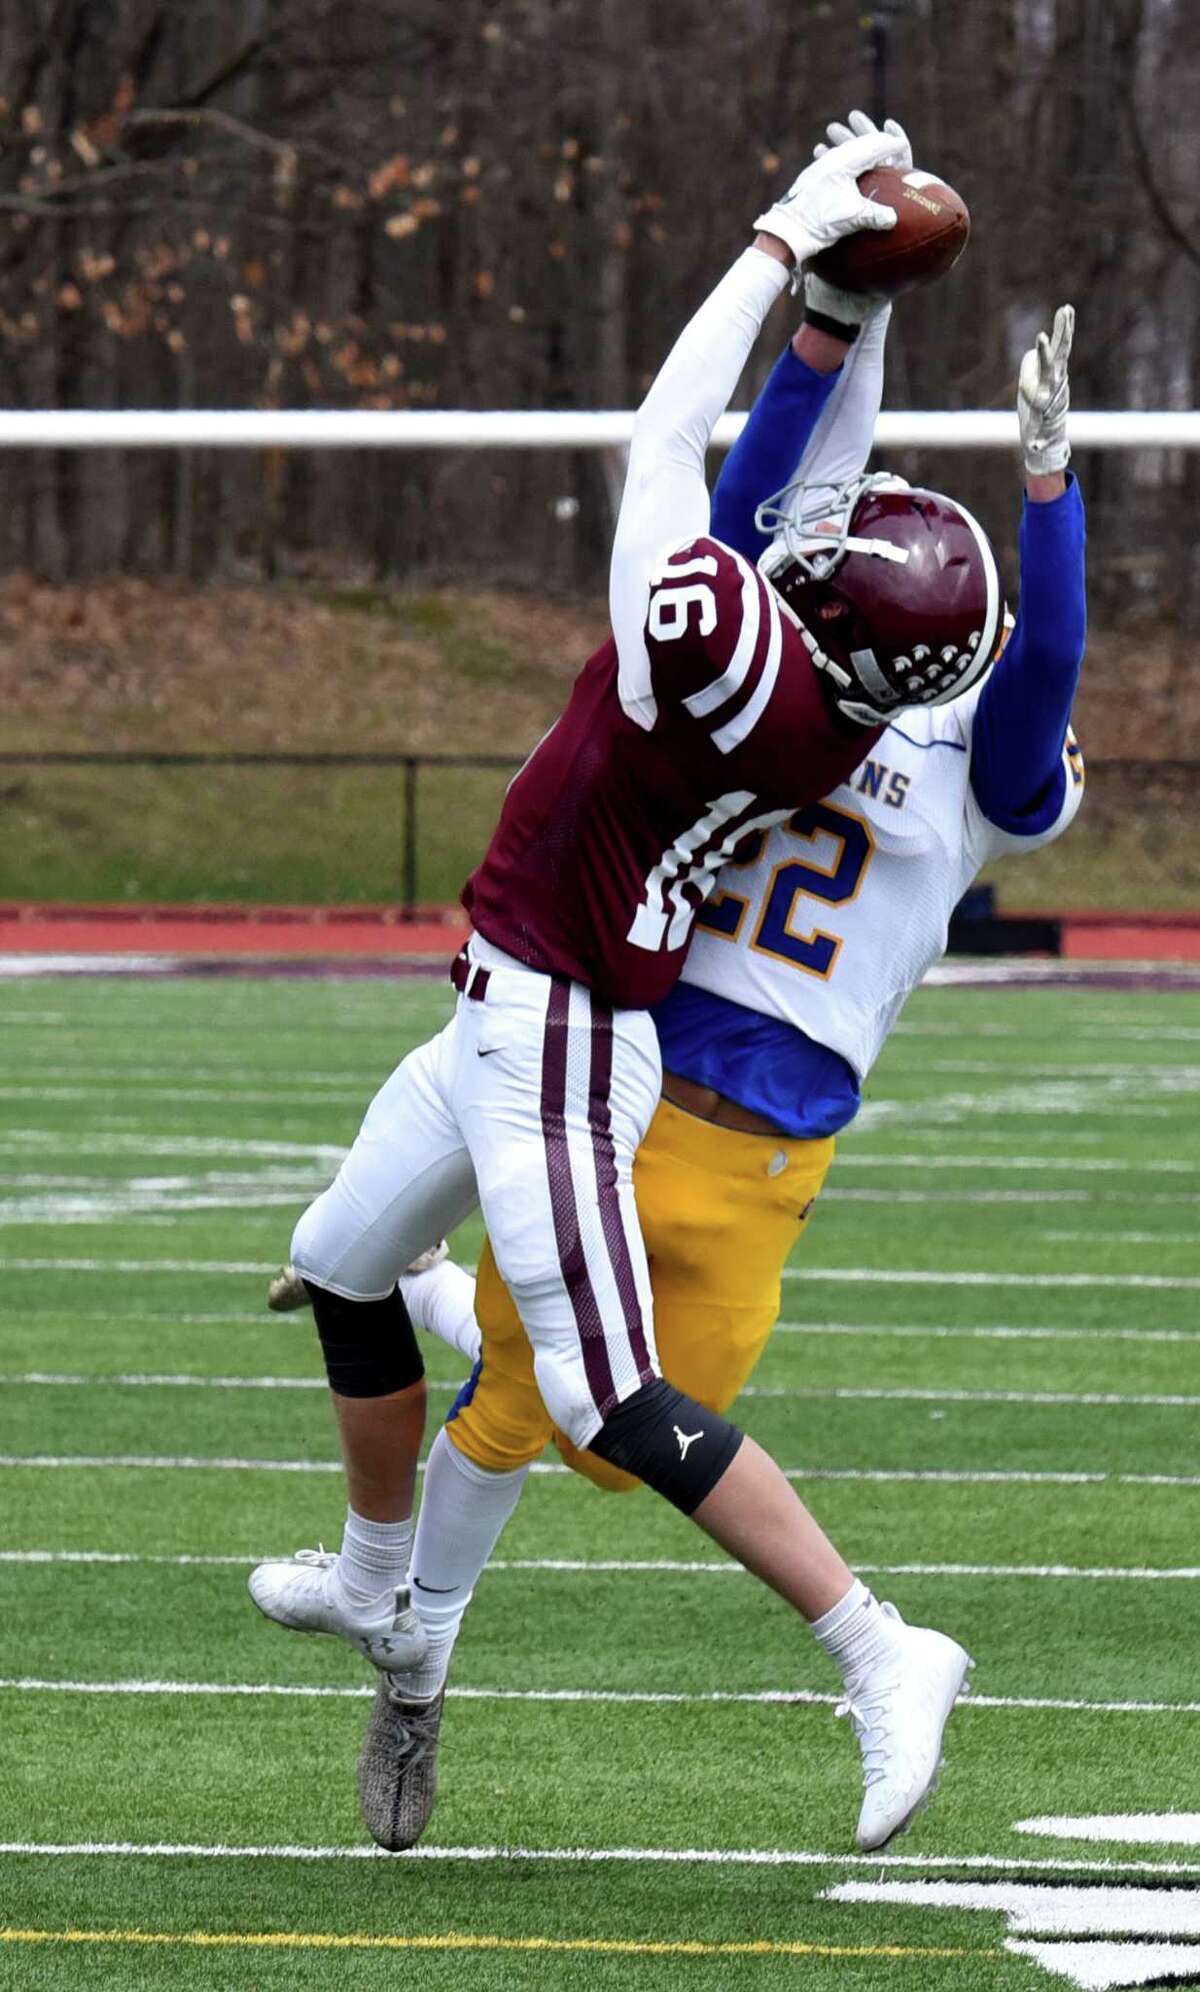 Queensbury's Patrick Morehouse, right, breaks up a pass intended for Burnt Hills-Ballston Lake's Vincent Venditti, left, during a varsity football game on Friday, April 2, 2021, at Burnt Hills-Ballston Lake High School in Ballston, N.Y. (Will Waldron/Times Union)